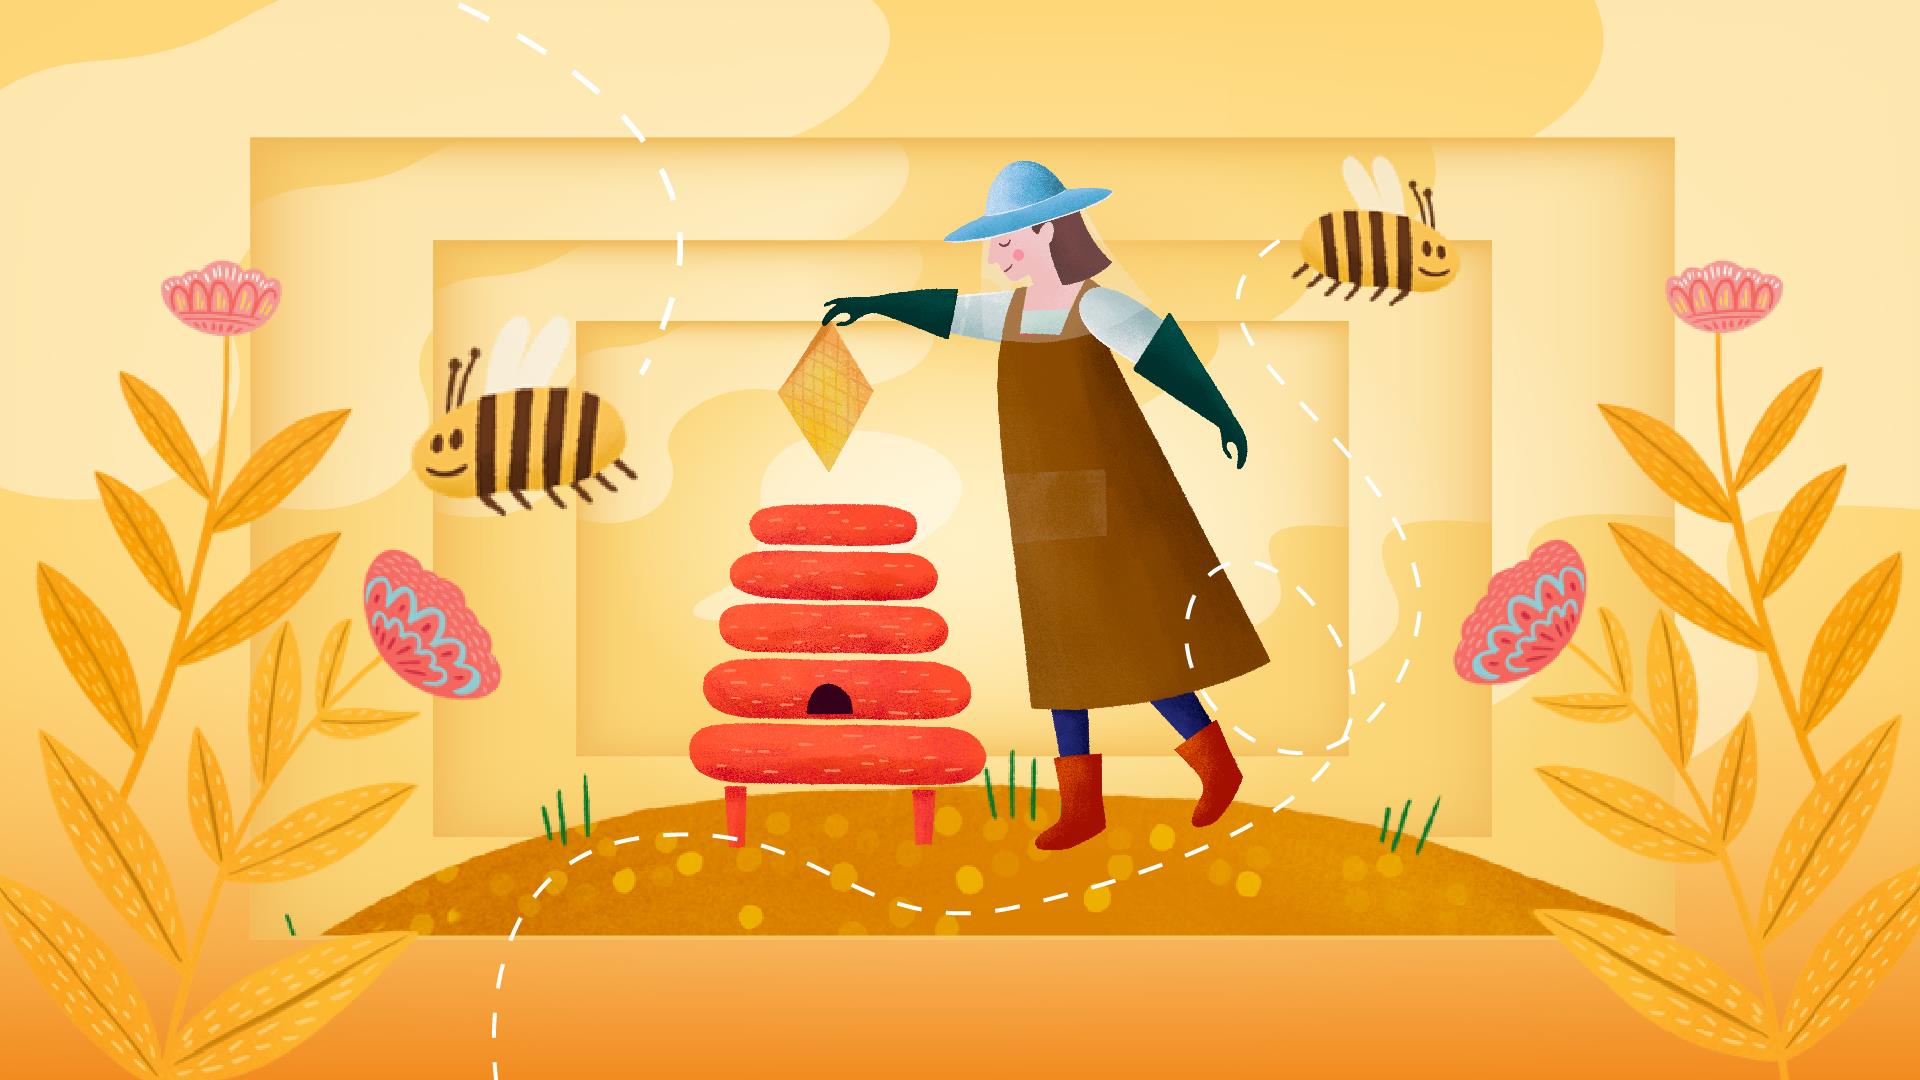 Illustration of a beekeeper taking honey from a hive